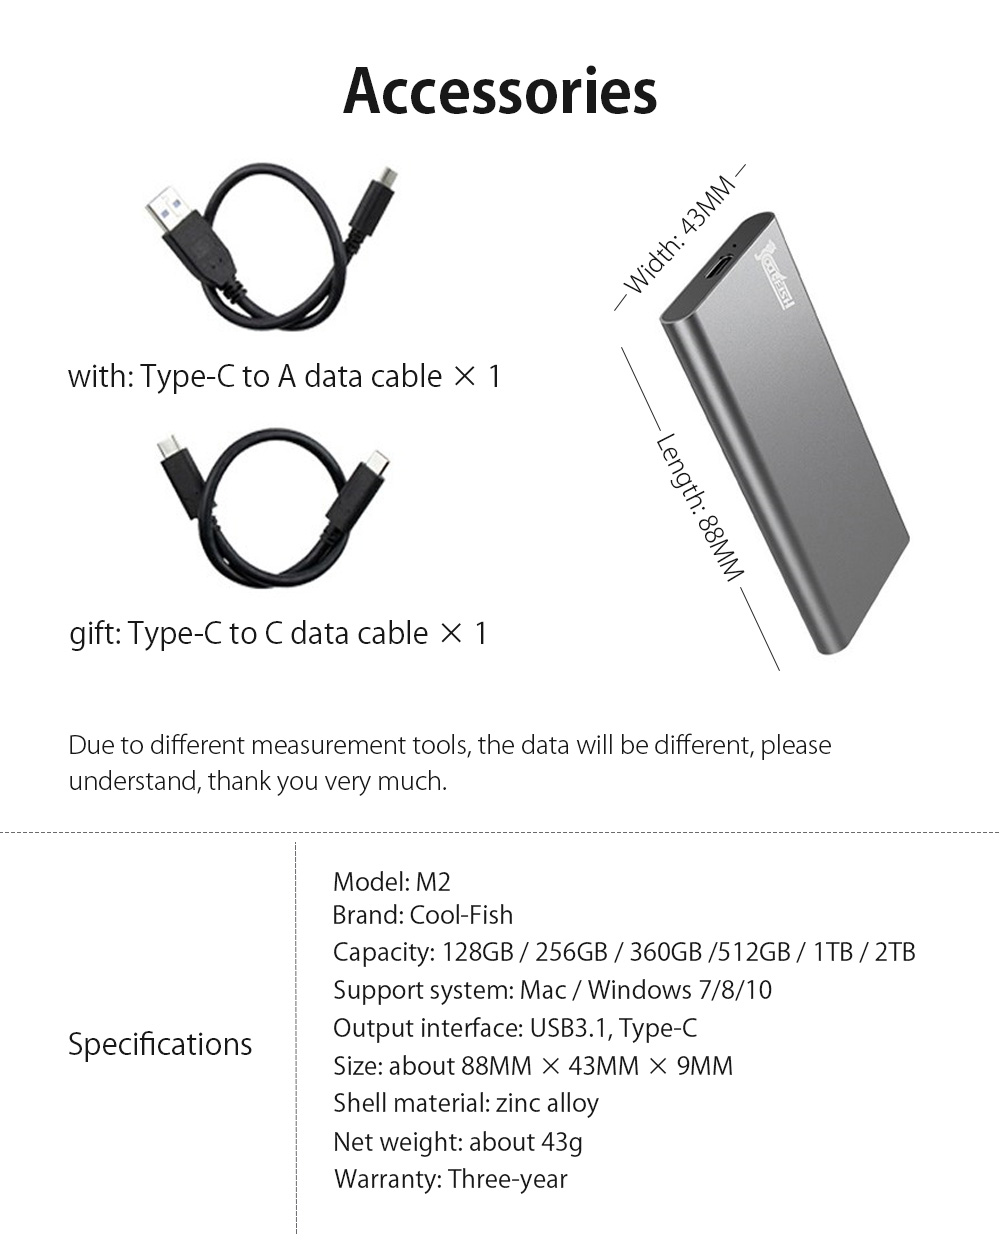 Coolfish--Type-C-USB-31-Gen-2-Solid-State-Drive-Mobile-External-Hard-Drive-SSD-for-Windows-Android-M-1681729-10